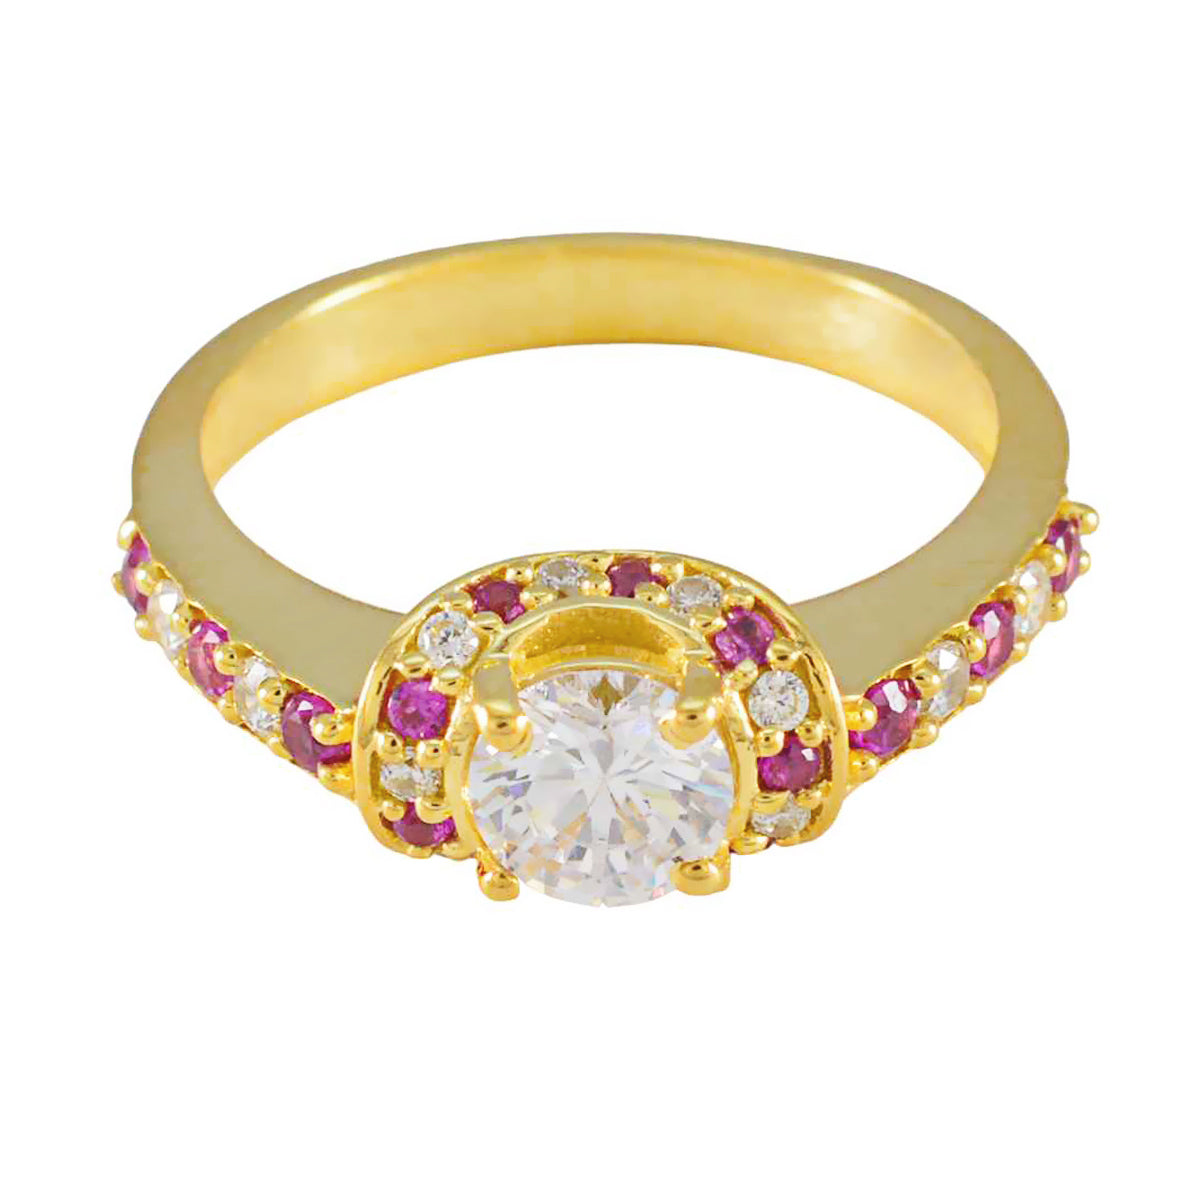 Riyo Choice Silver Ring With Yellow Gold Plating Ruby CZ Stone Round Shape Prong Setting Bridal Jewelry Christmas Ring